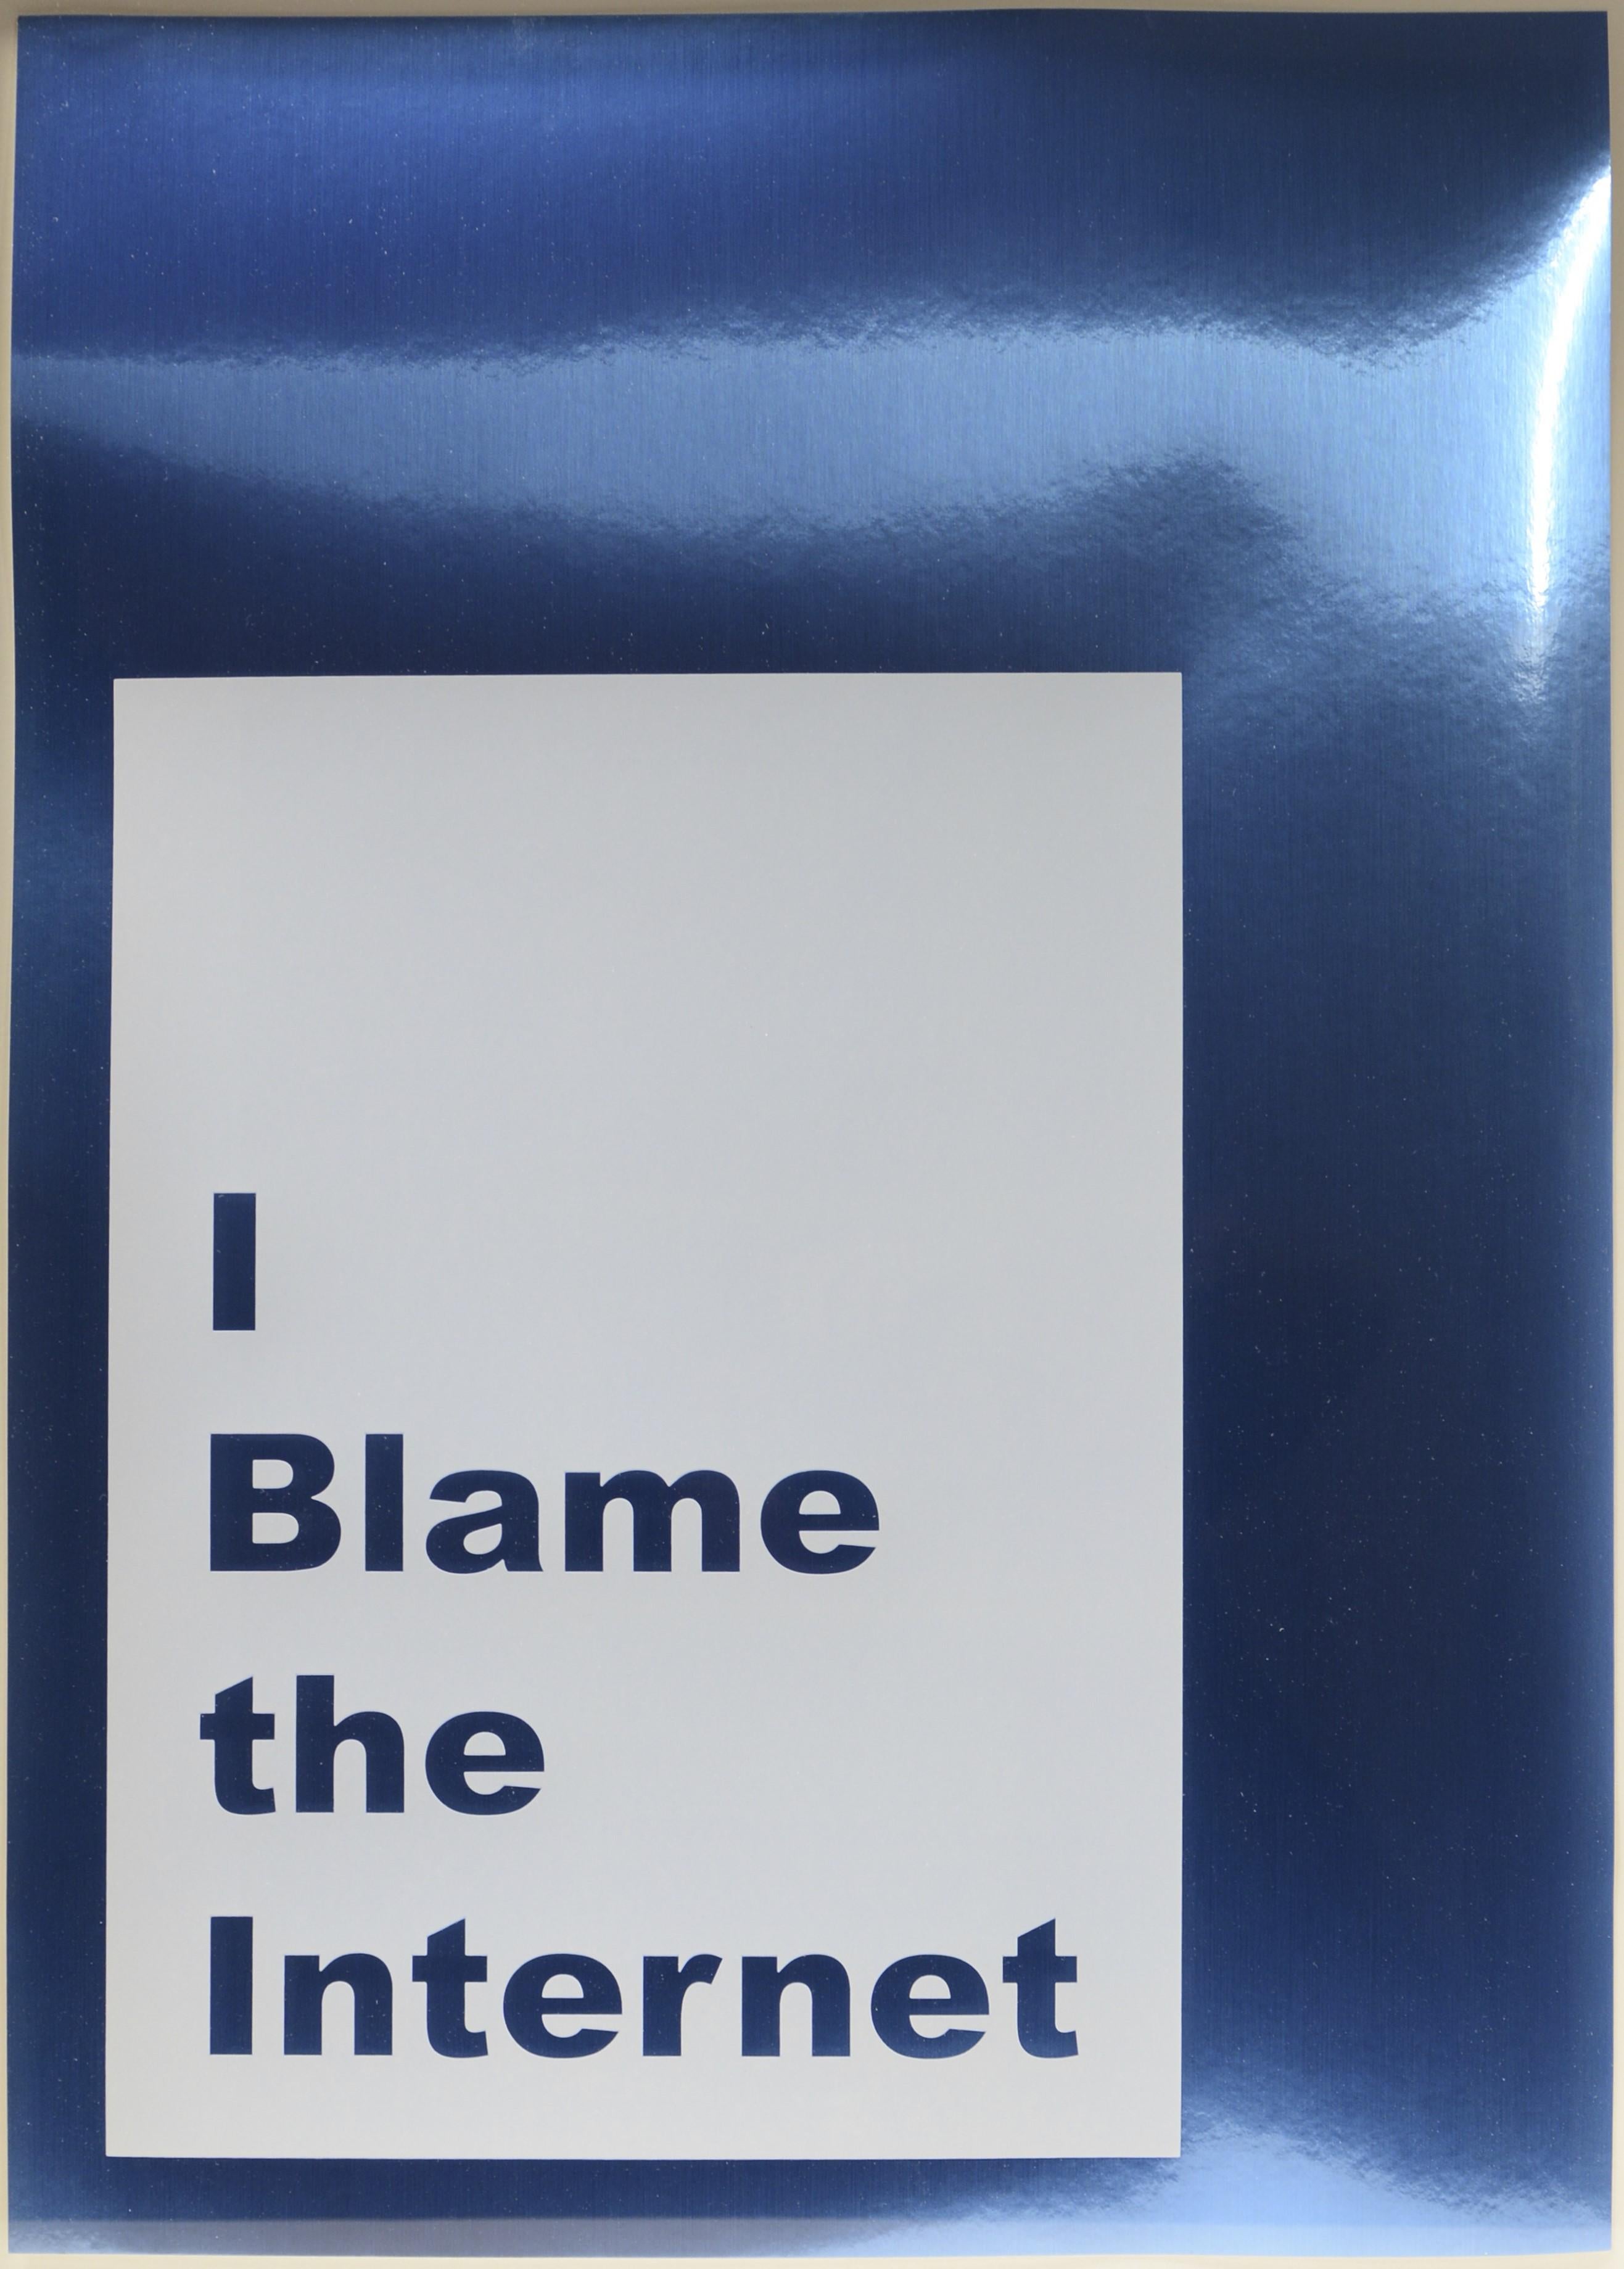 Jeremy Deller Abstract Print - I Blame the Internet